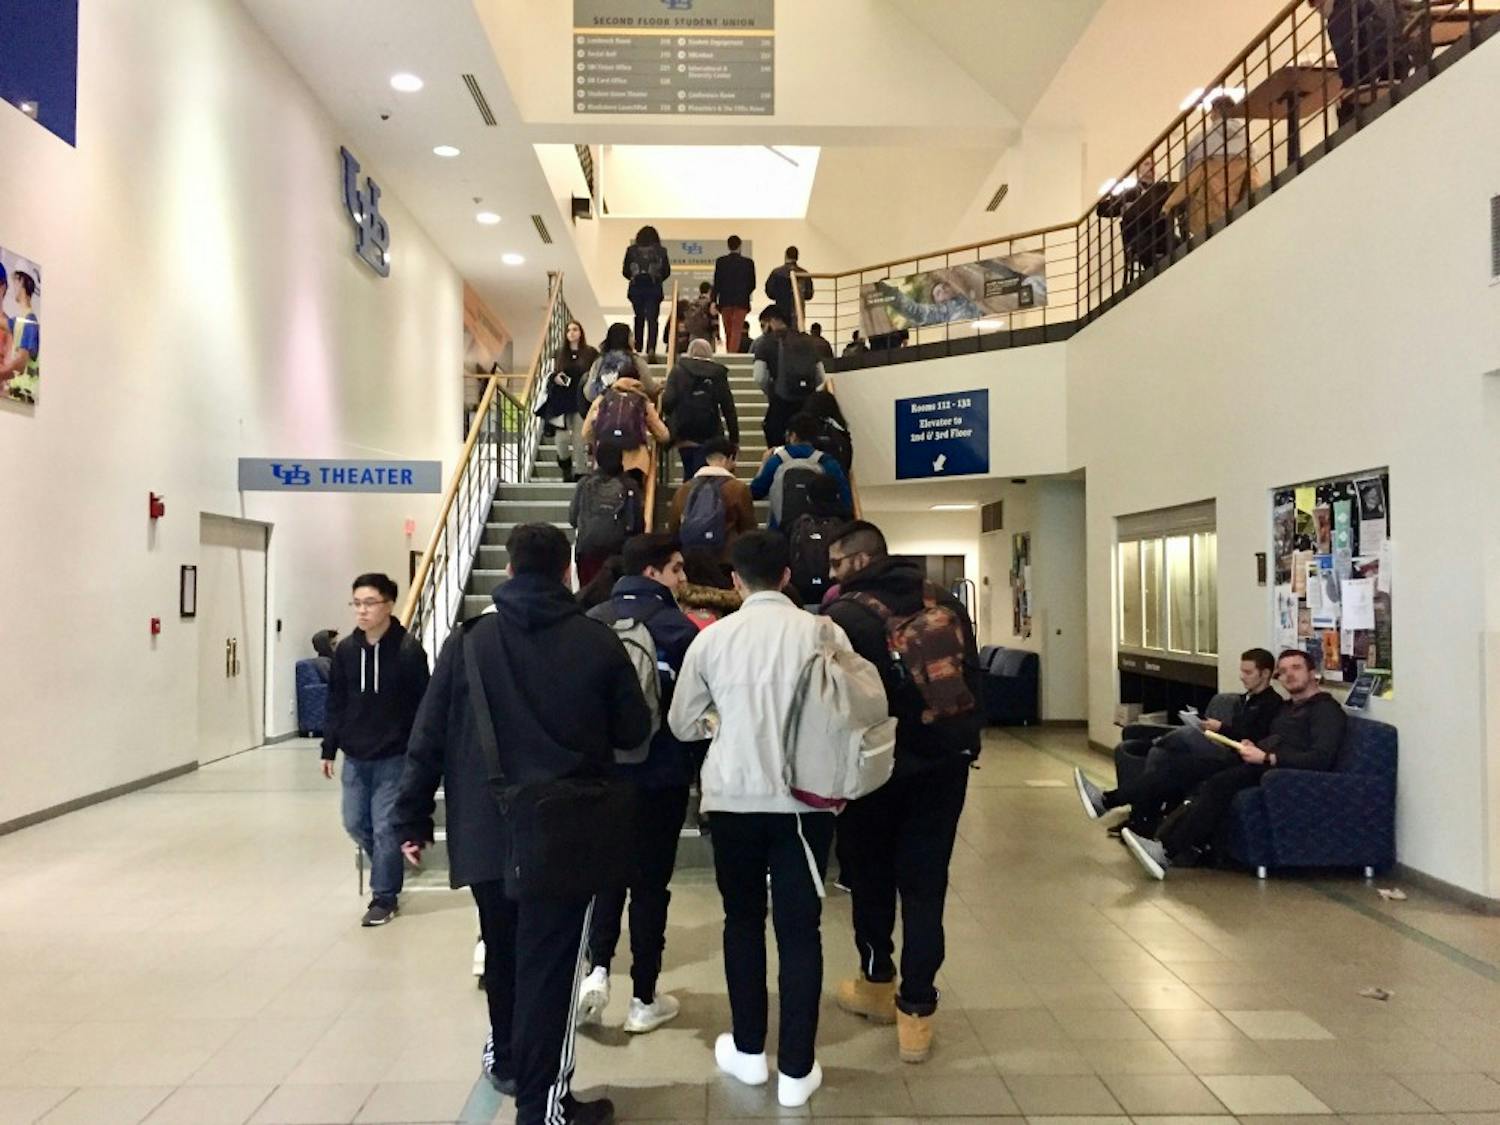 Members of the UB community came together to hold a vigil for the victims of the New Zealand shooting